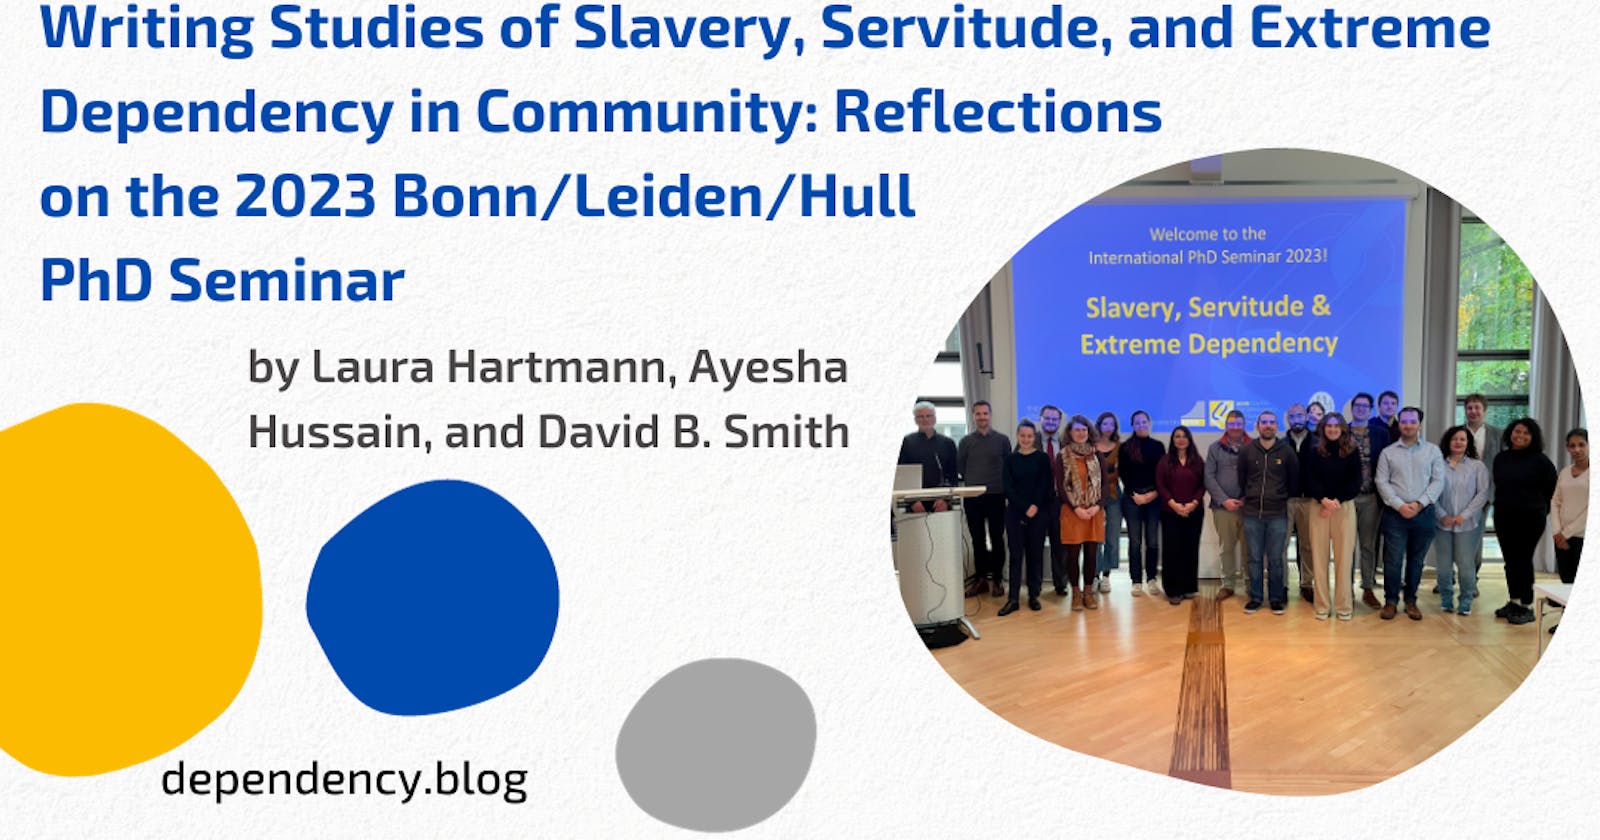 Writing Studies of Slavery, Servitude, and Extreme Dependency in Community: 
Reflections on the 2023 Bonn/Leiden/Hull PhD Seminar